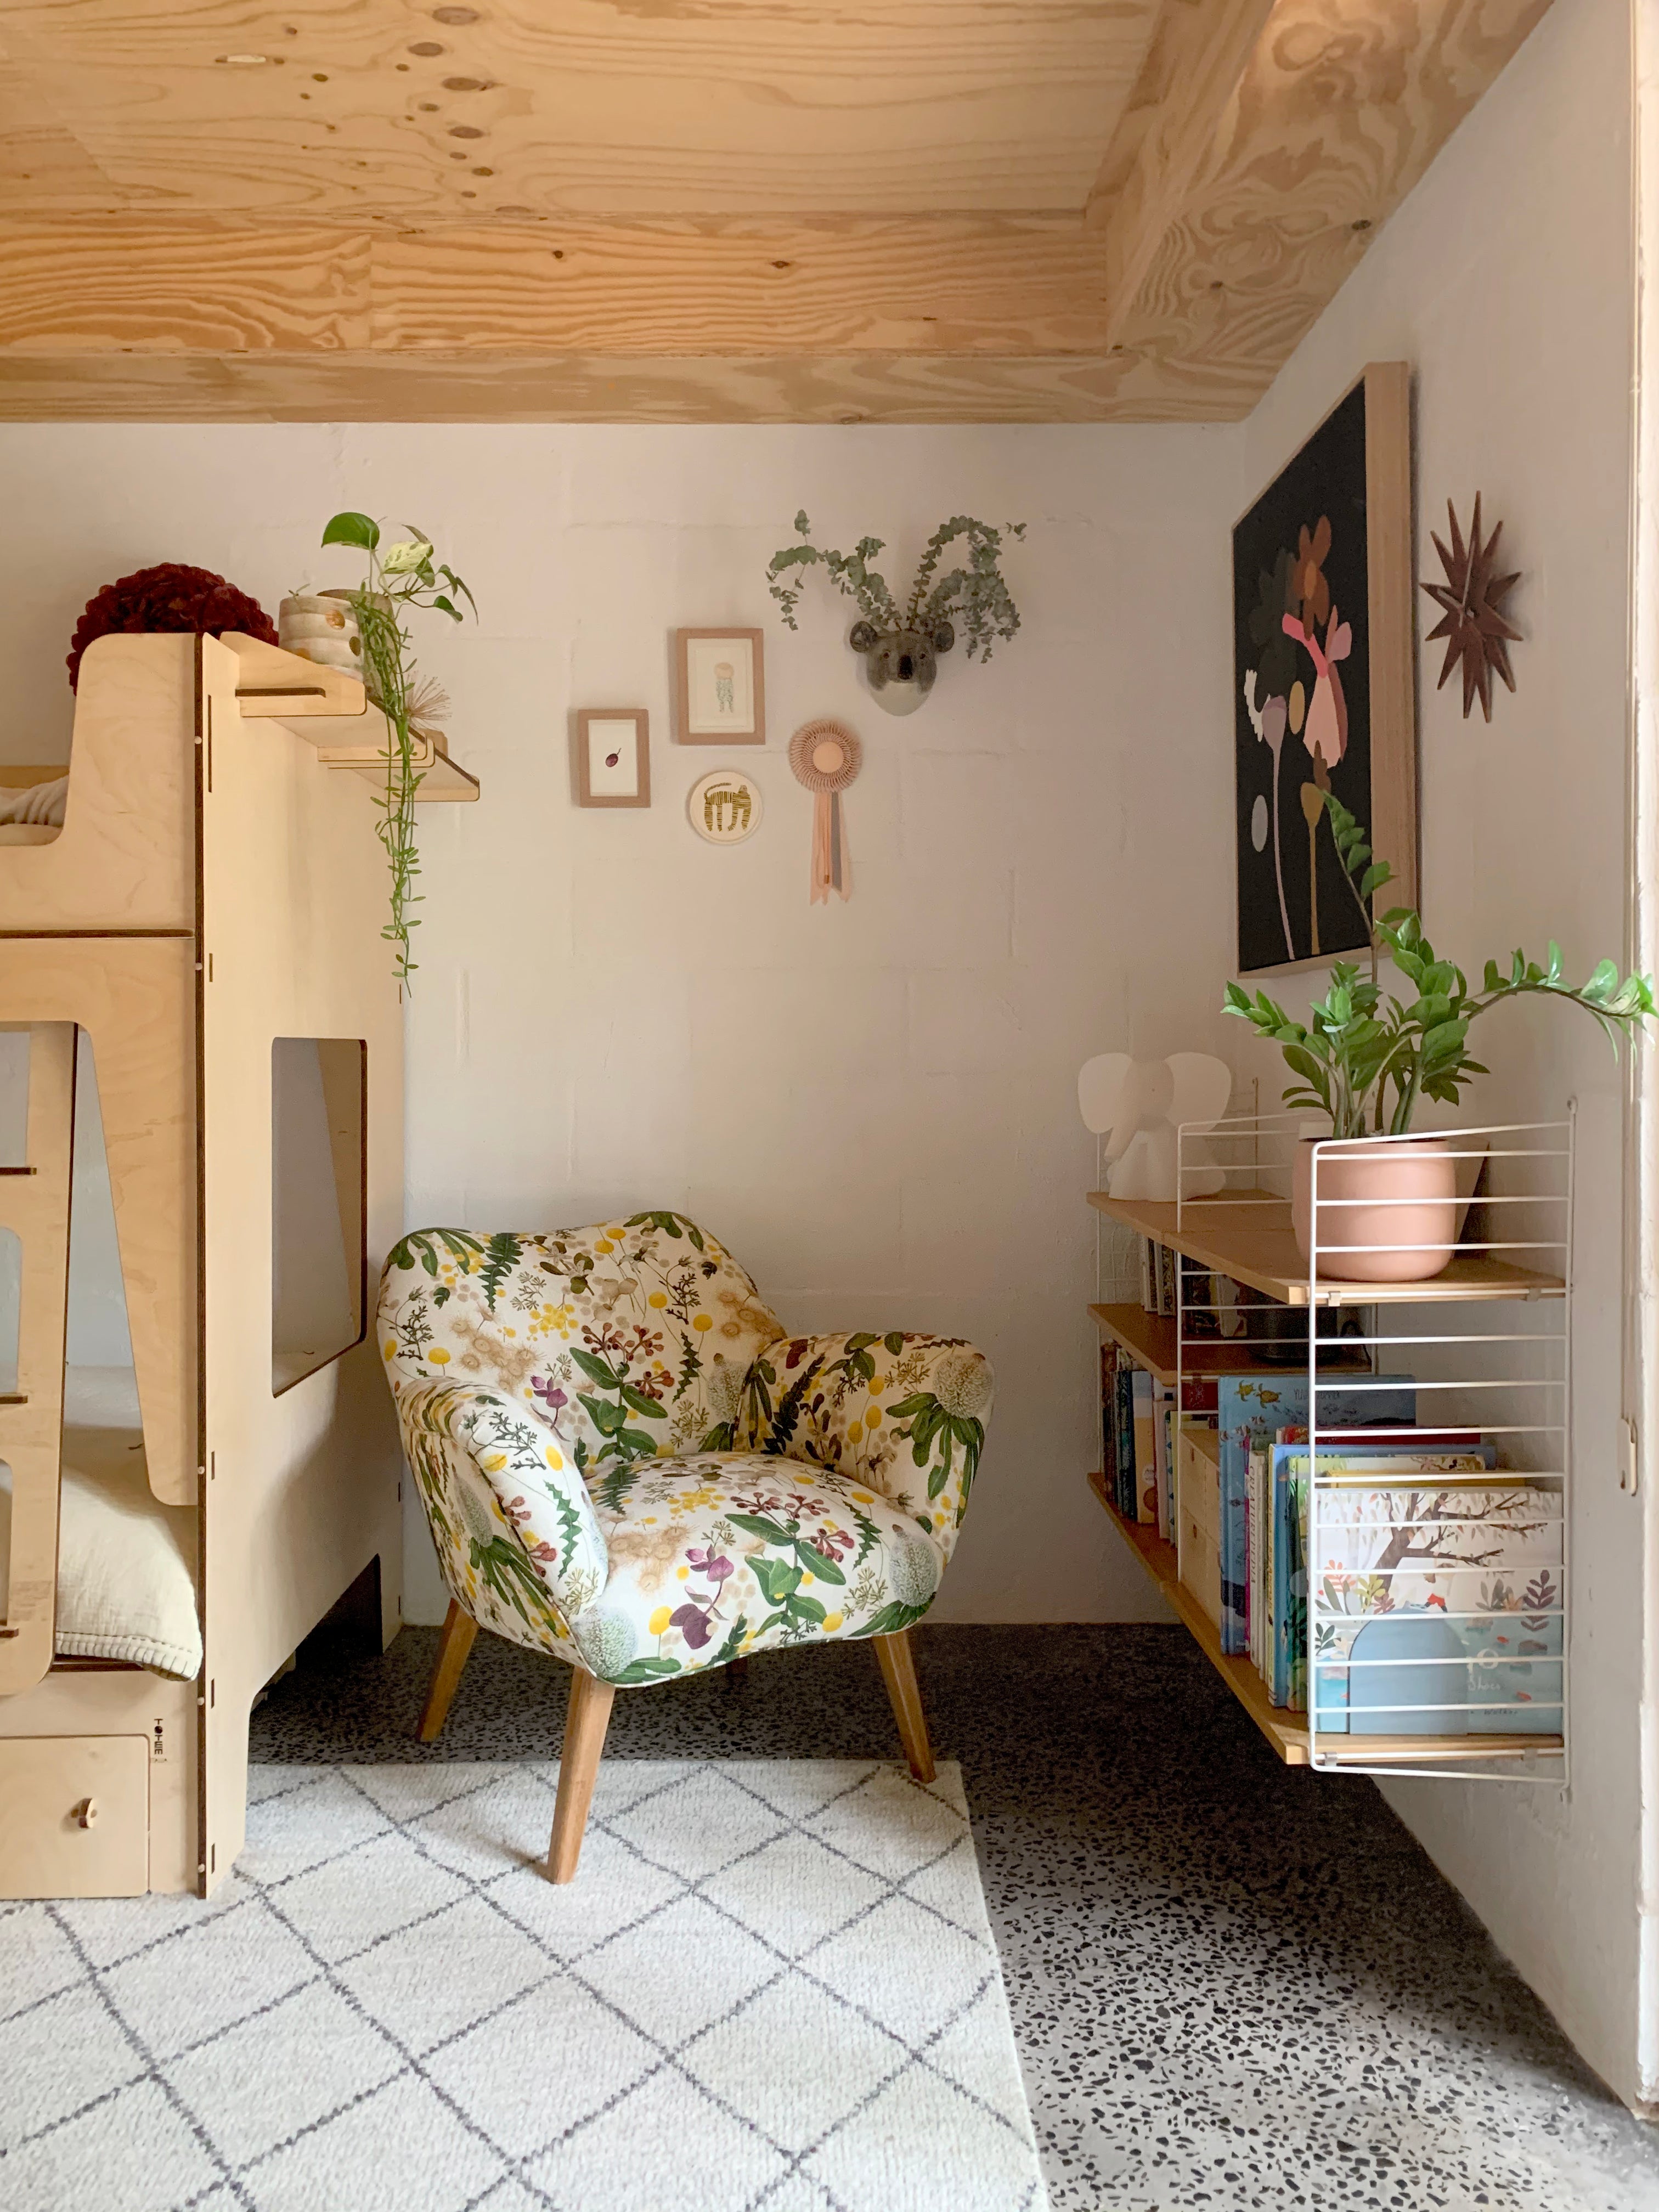 A children's bunk bed with a stuffed armchair in a large-scale botanical print in pink, yellow, green and cream.